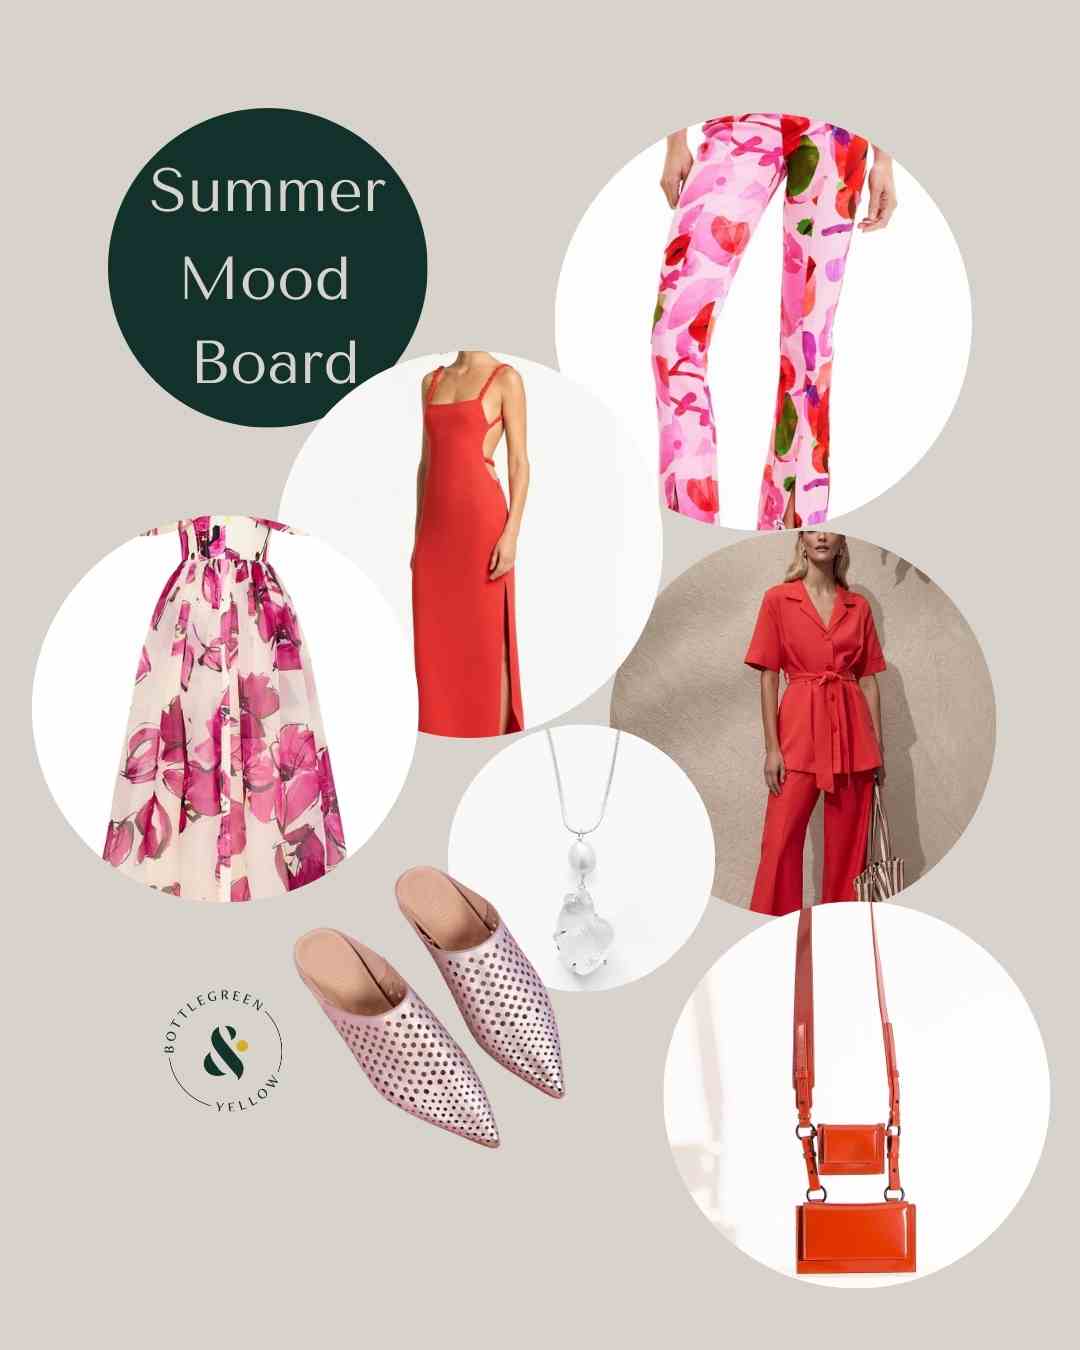 Mood board with six images; a pair of pink floral pants; red backless maxi dress; floral maxi dress with shestring straps; pearl necklace on a silver chain; pink mules; red safari style pants suit; red cross body bag